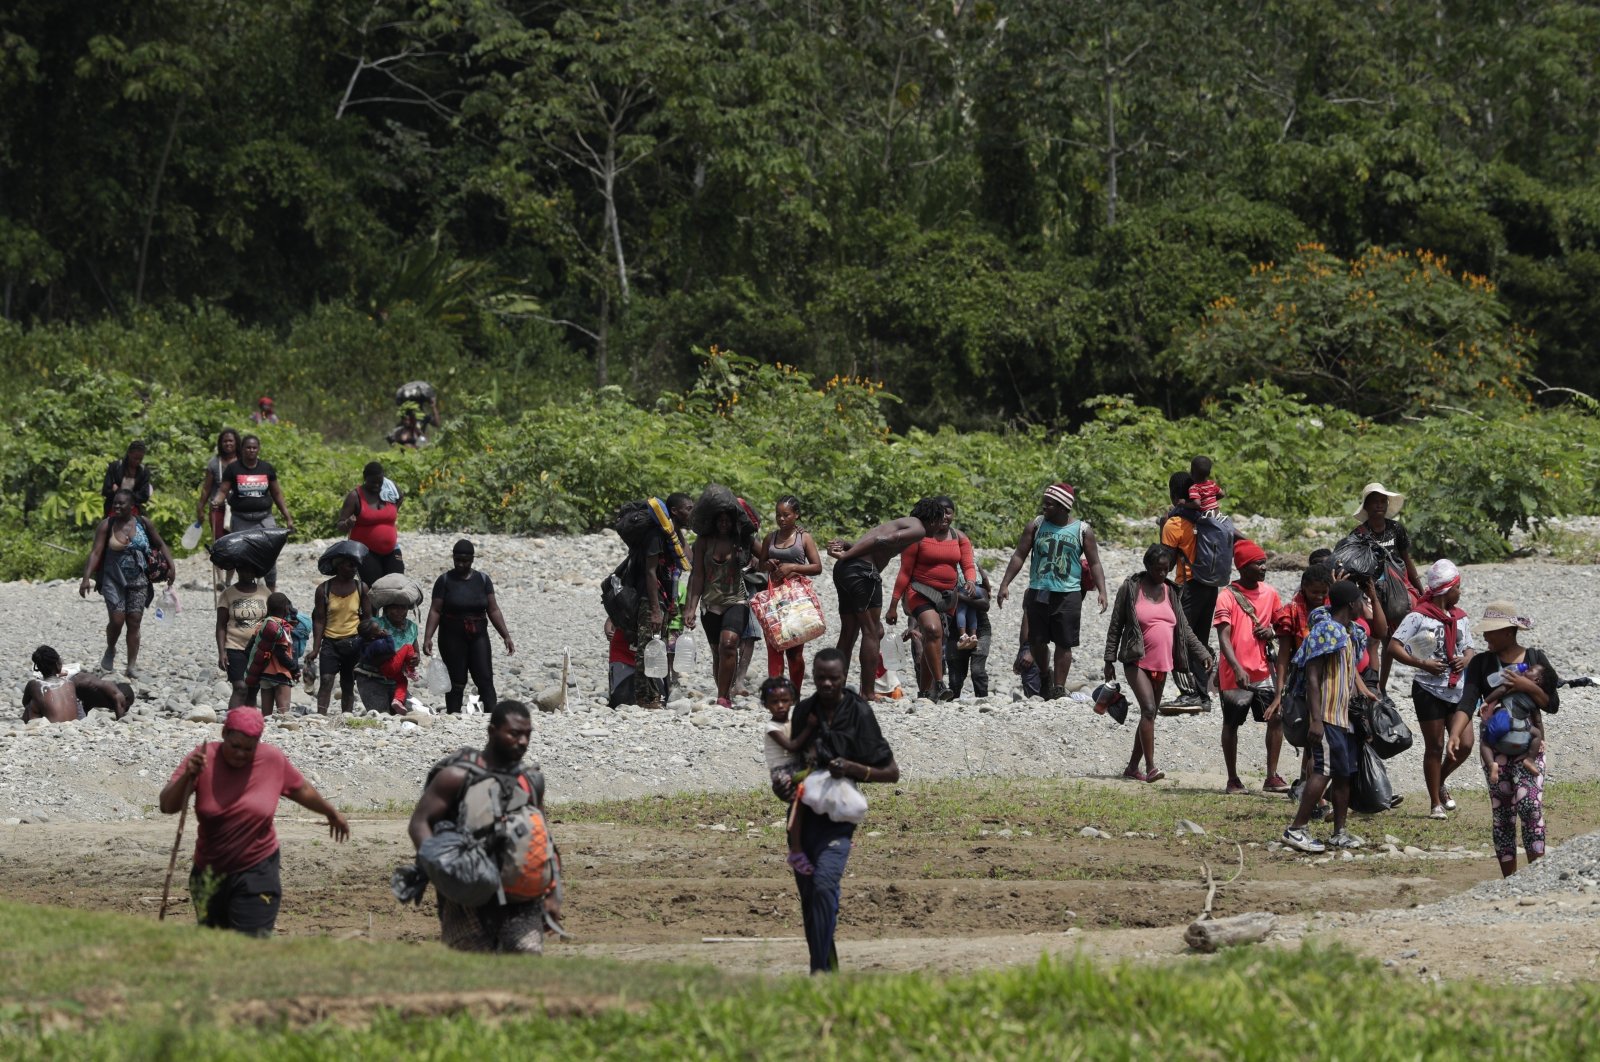 Migrants cross the Tuquesa river after a trip on foot through the jungle to Bajo Chiquito, Darien Province, Panama, on Feb. 10, 2021. (AP Photo)